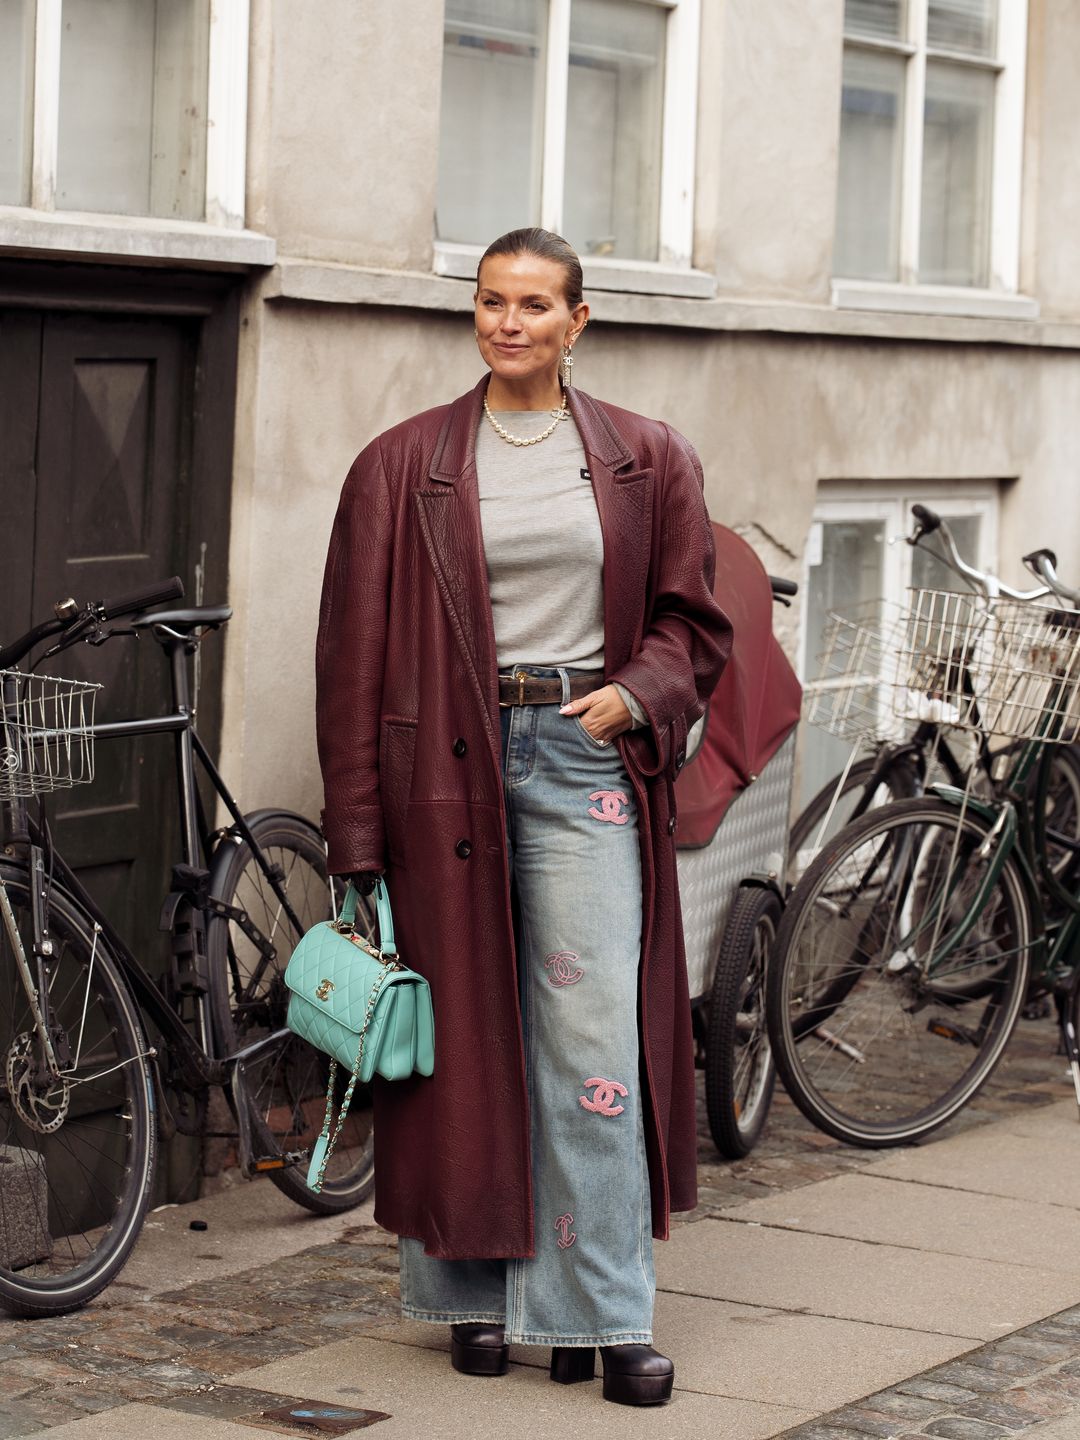 COPENHAGEN, DENMARK - JANUARY 29: Janka Polliani is wearing Chanel blue jeans with a pink embroidered logo, a long leather burgundy coat, a grey top, and a mint green Chanel bag during the Copenhagen Fashion Week AW24 on January 29, 2024 in Copenhagen, Denmark. (Photo by Raimonda Kulikauskiene/Getty Images)